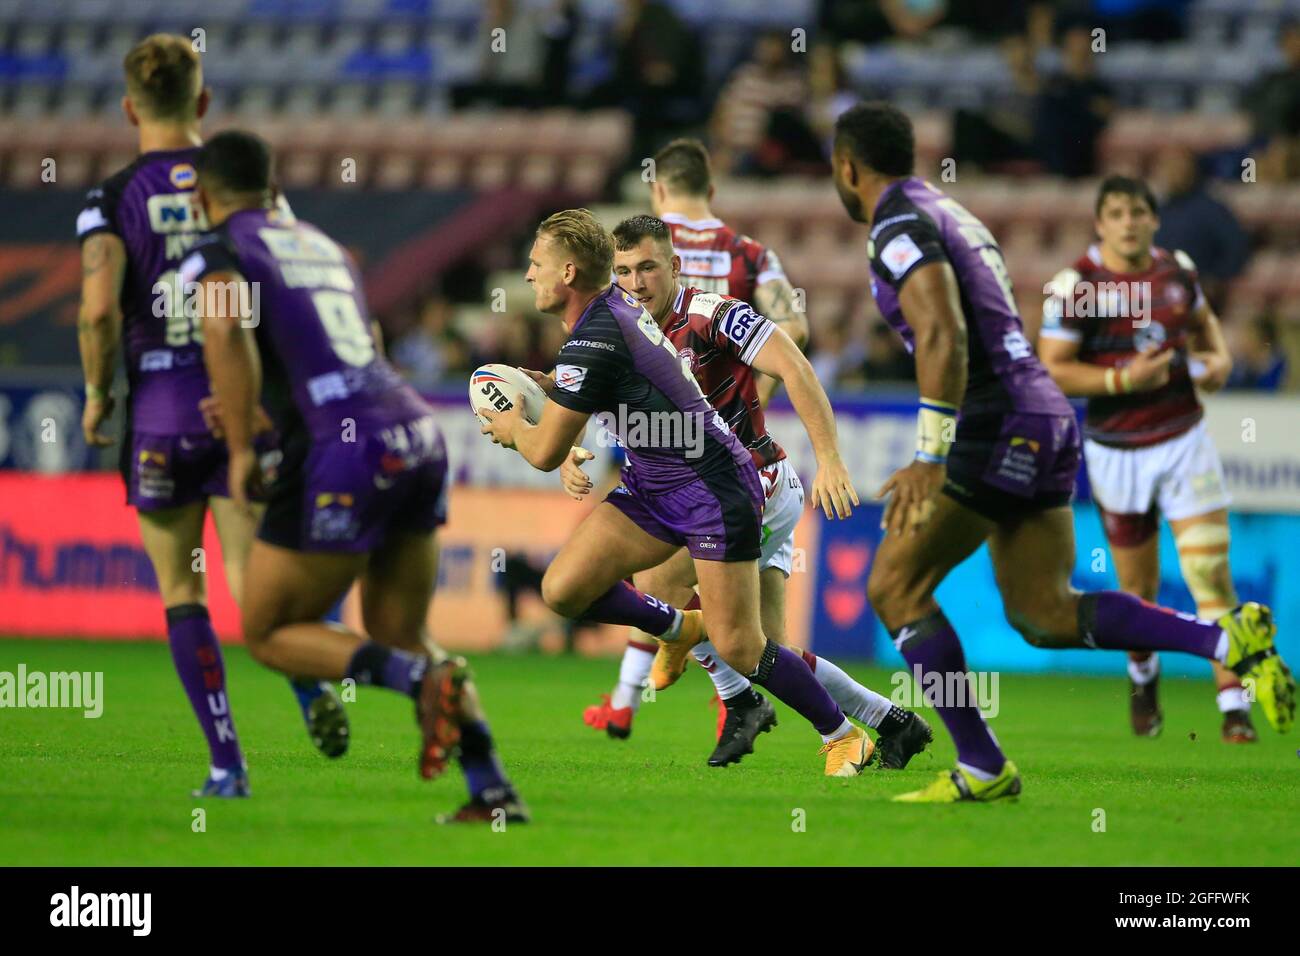 Wigan, UK. 25th Aug, 2021. Brad Dwyer (14) of Leeds Rhinos runs with the ball in Wigan, United Kingdom on 8/25/2021. (Photo by Conor Molloy/News Images/Sipa USA) Credit: Sipa USA/Alamy Live News Stock Photo